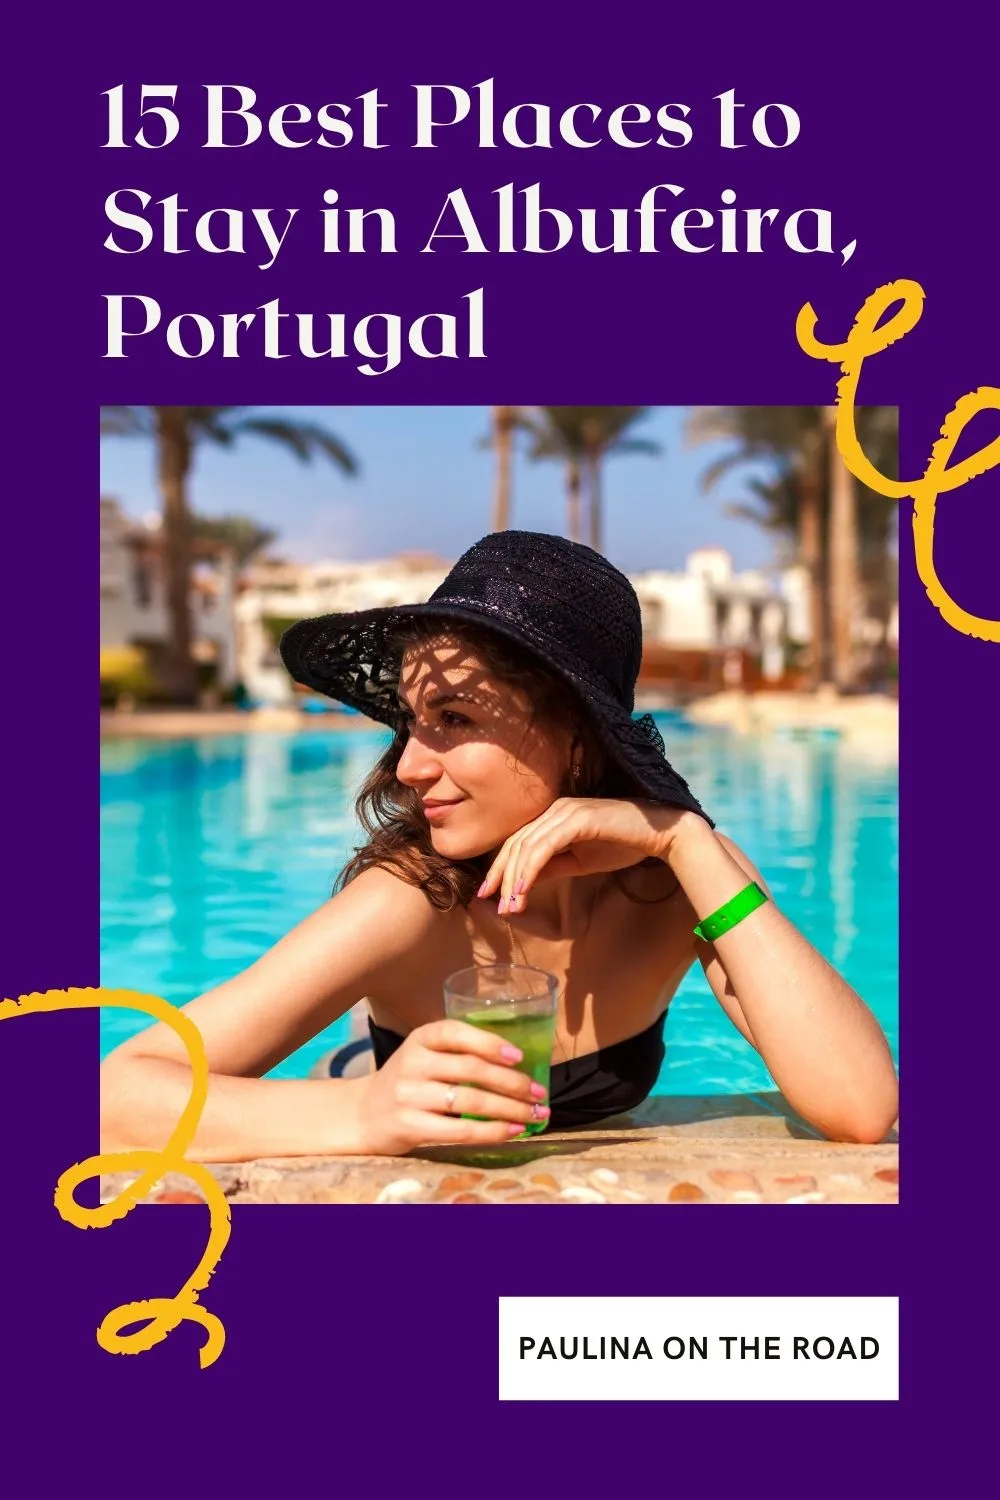 Are you looking for the best hotels in Albufeira but confused about which one to choose? If yes, then you have come to the right place. This guide has all the best Albufeira accommodation options, including budget and luxury hotels in Albufeira and Albufeira hotels on the beach! #Albufeira #Algarve #Portugal #Hotels #AlgarvePortugal #VisitPortugal #VisitAlbufeira #AlbufeiraPortugal #BeachVacation #Holiday